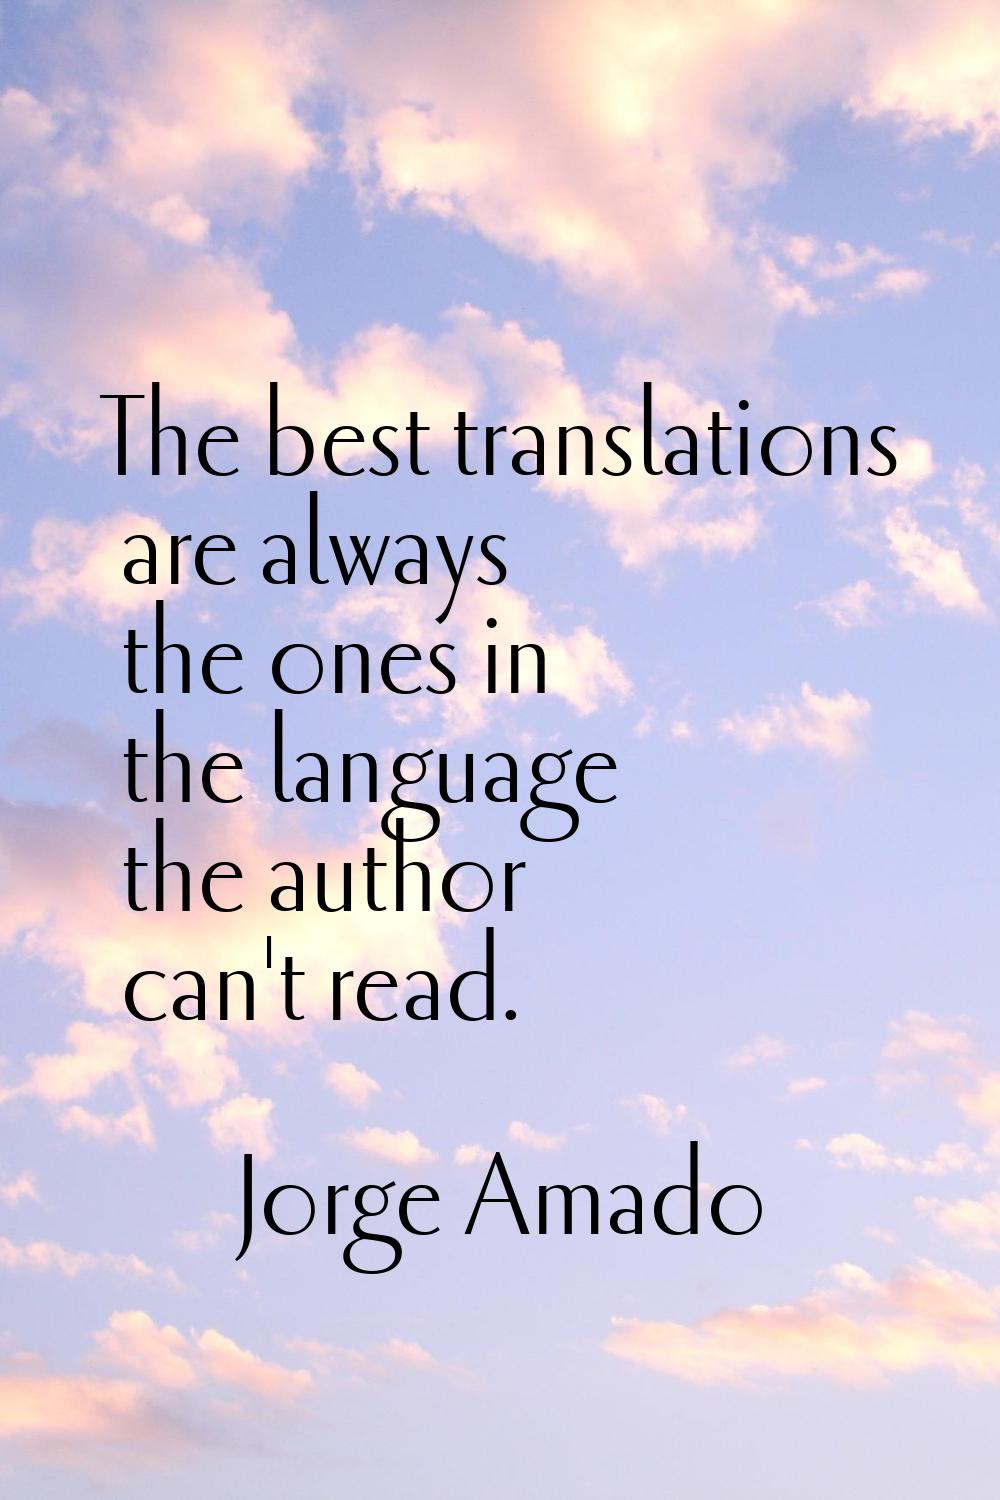 The best translations are always the ones in the language the author can't read.